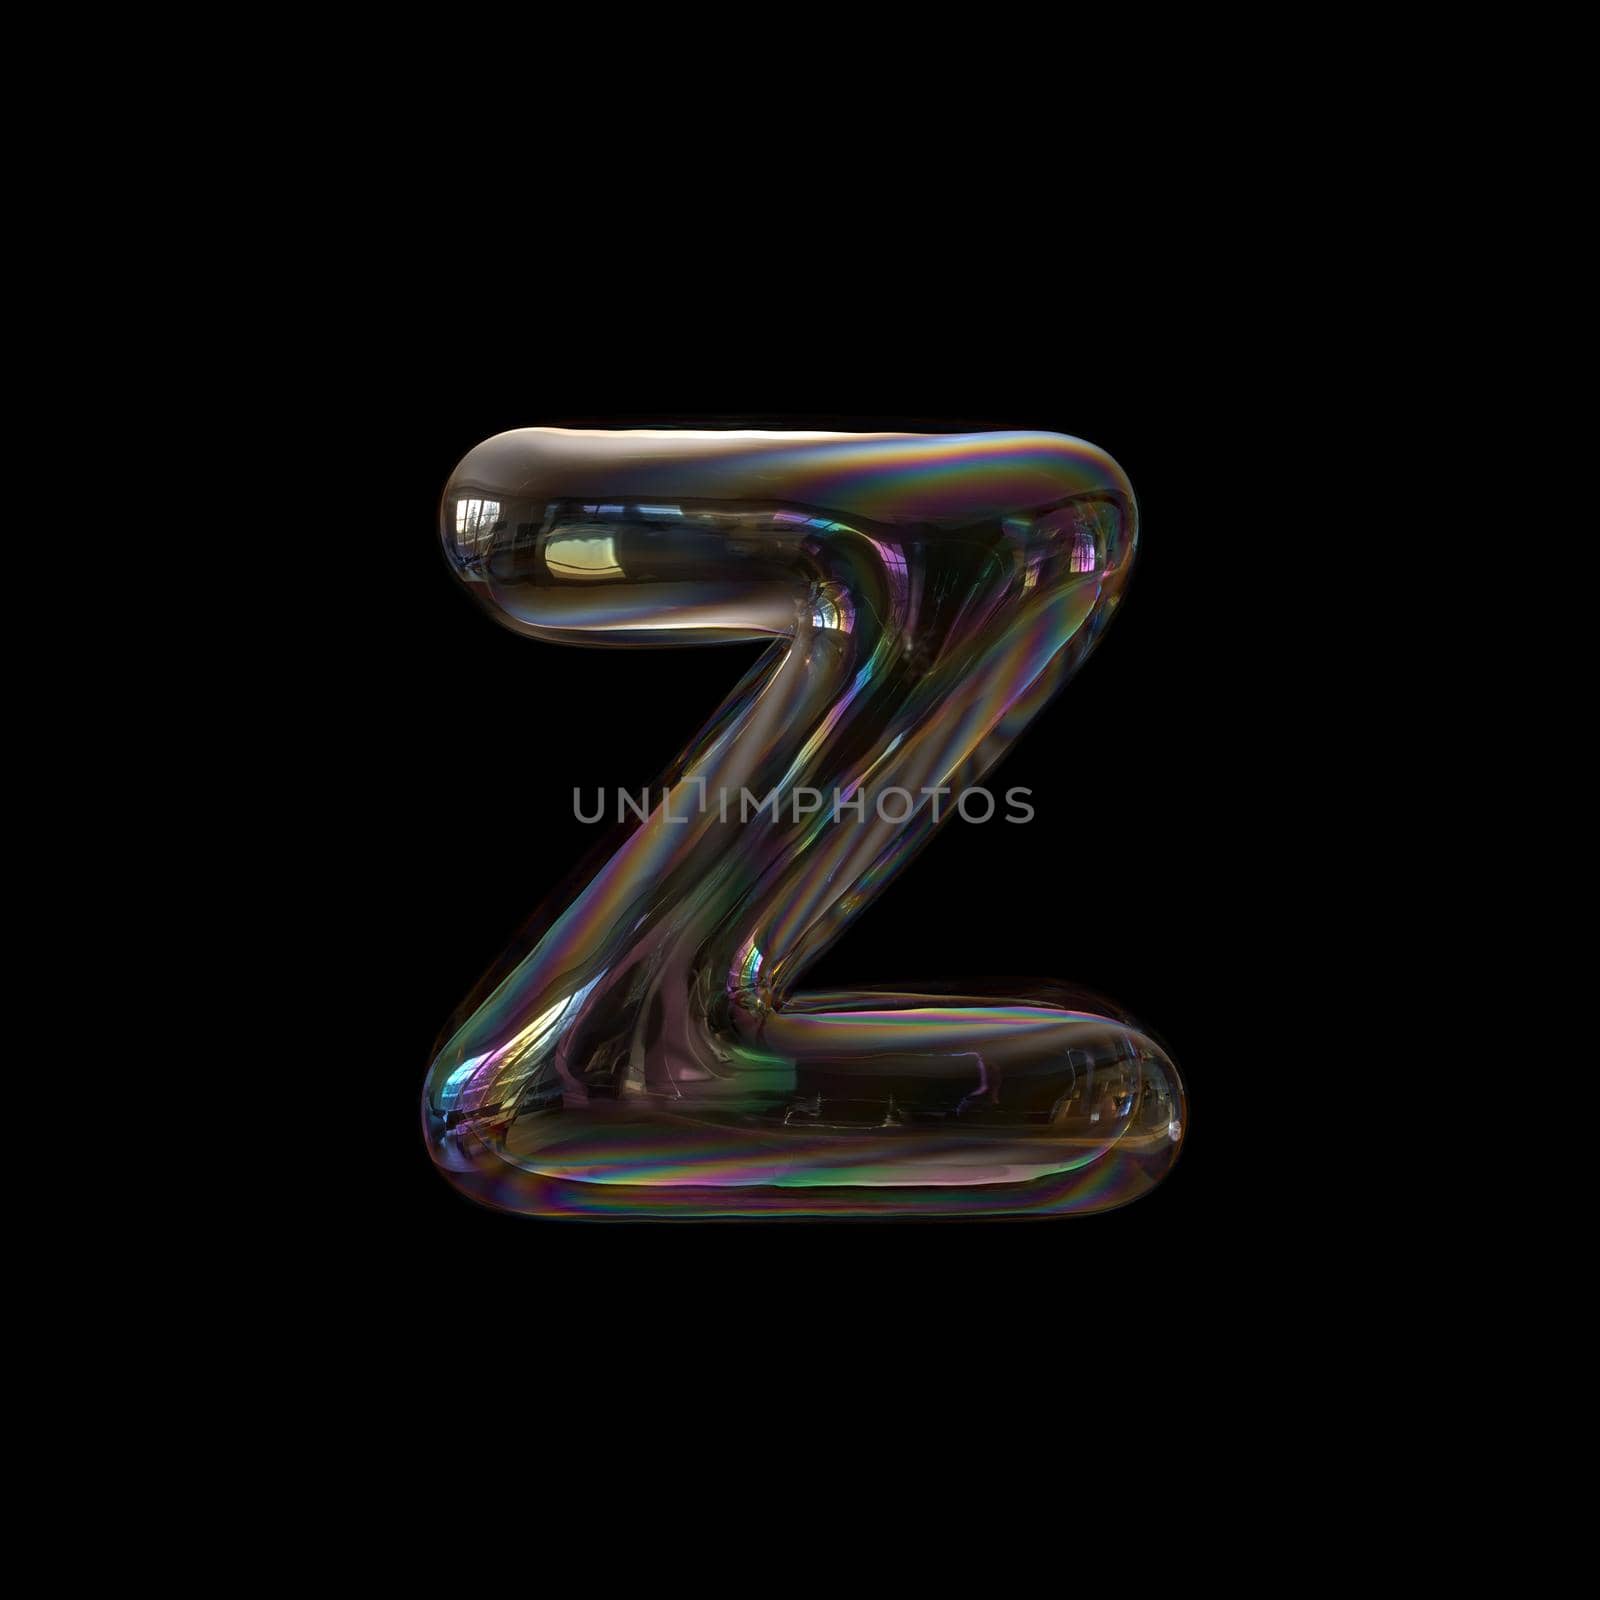 bubble writing 3d character Z - Lower-case 3d font isolated on a black background.
This 3d font collection is well-suited for various creative projects including but not limited to : Childhood. events. nature...